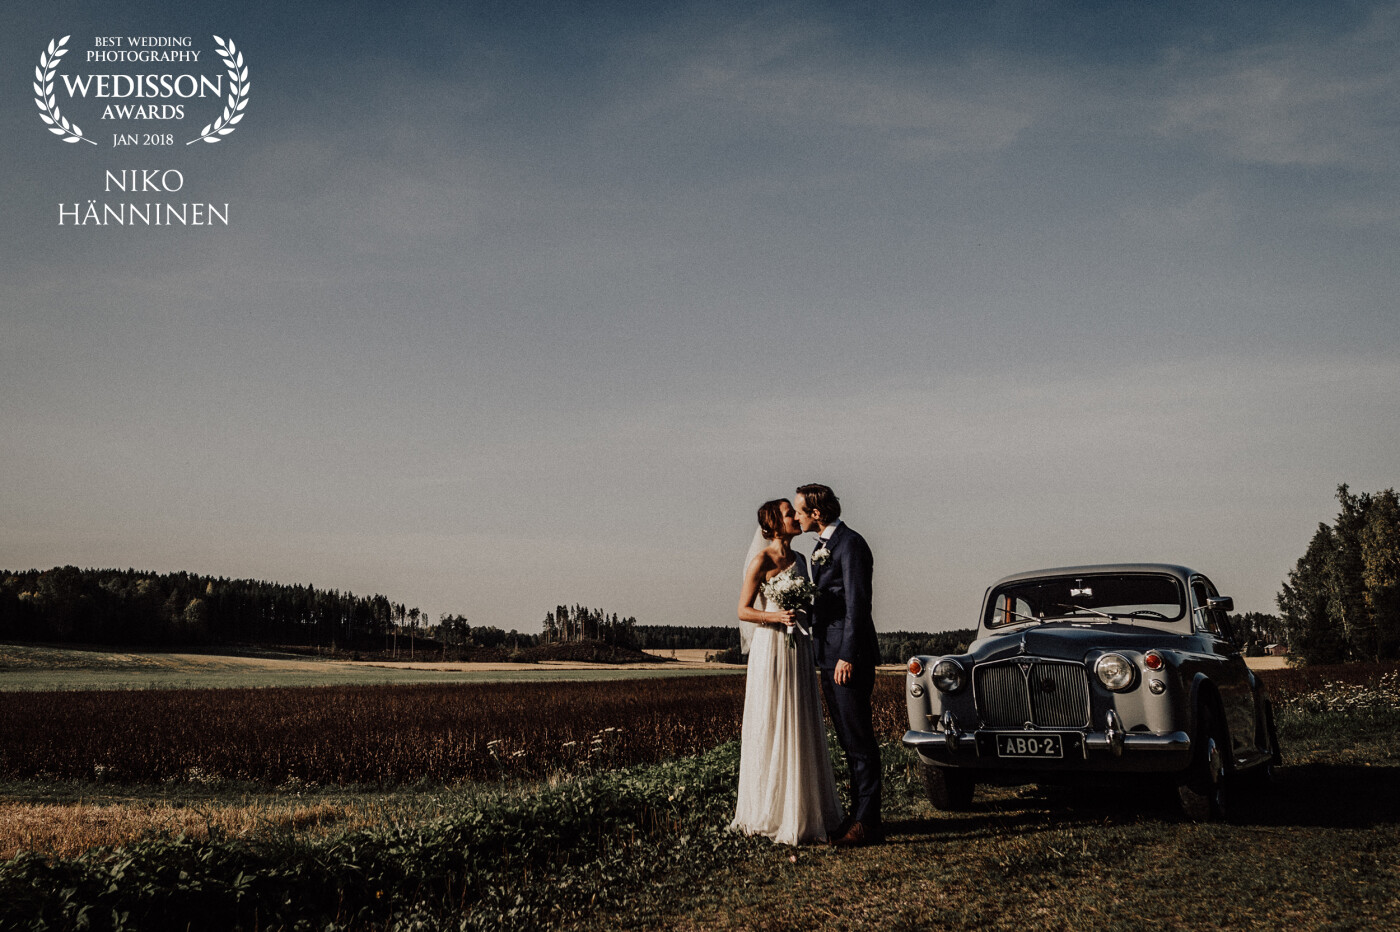 On our way from ceremony to reception we found this beautiful scenery with traditional finnish landscape and beautiful light. We just had to stop for few frames and we had to park this beautiful old Rover to be included in the picture.